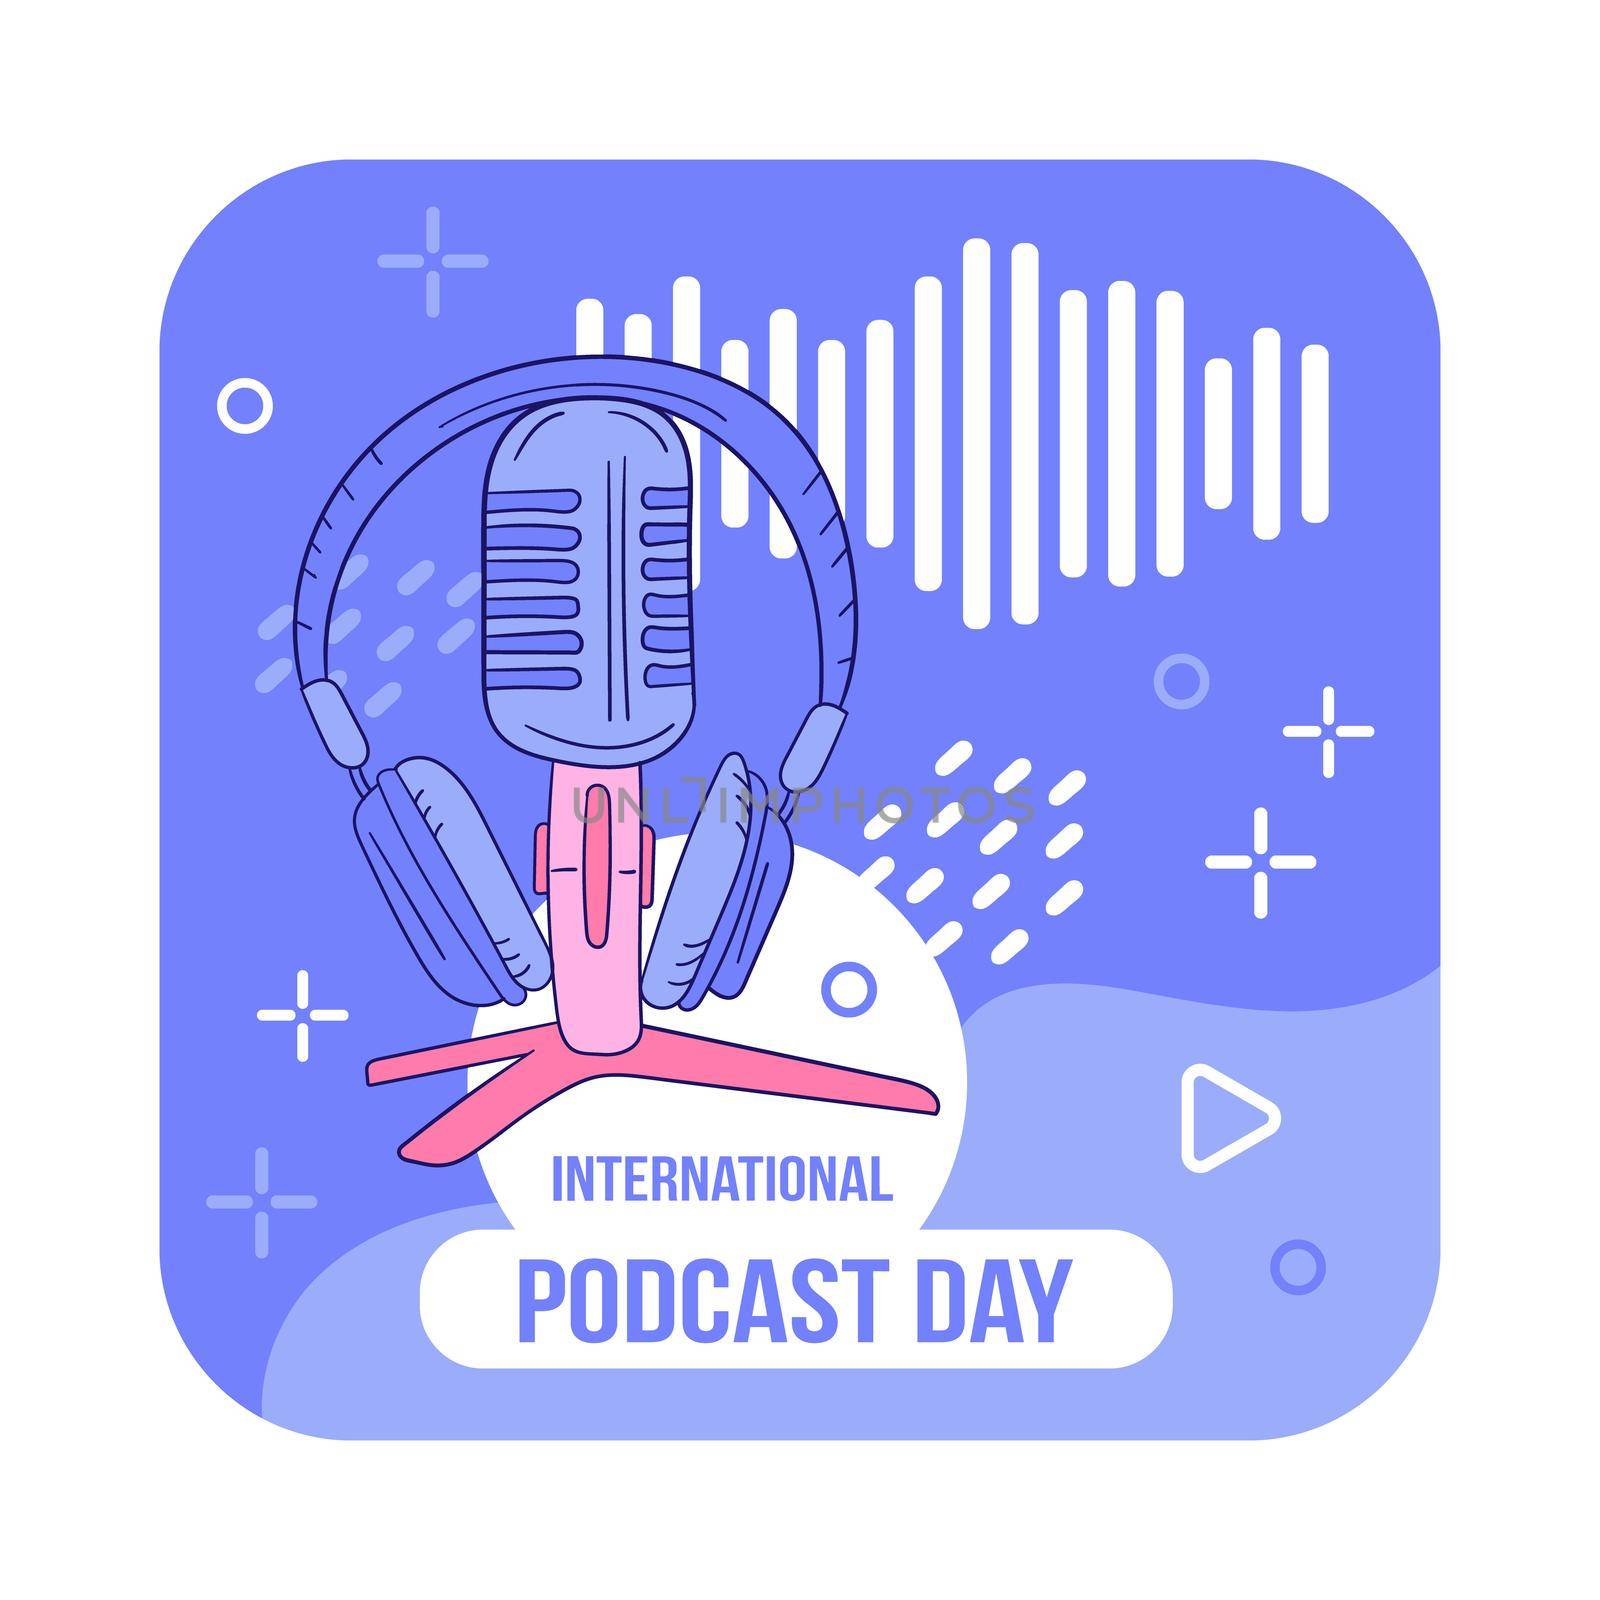 Vector illustration on the theme of International Podcast Day on September 30th. Microphone and headphones in hand drawn style